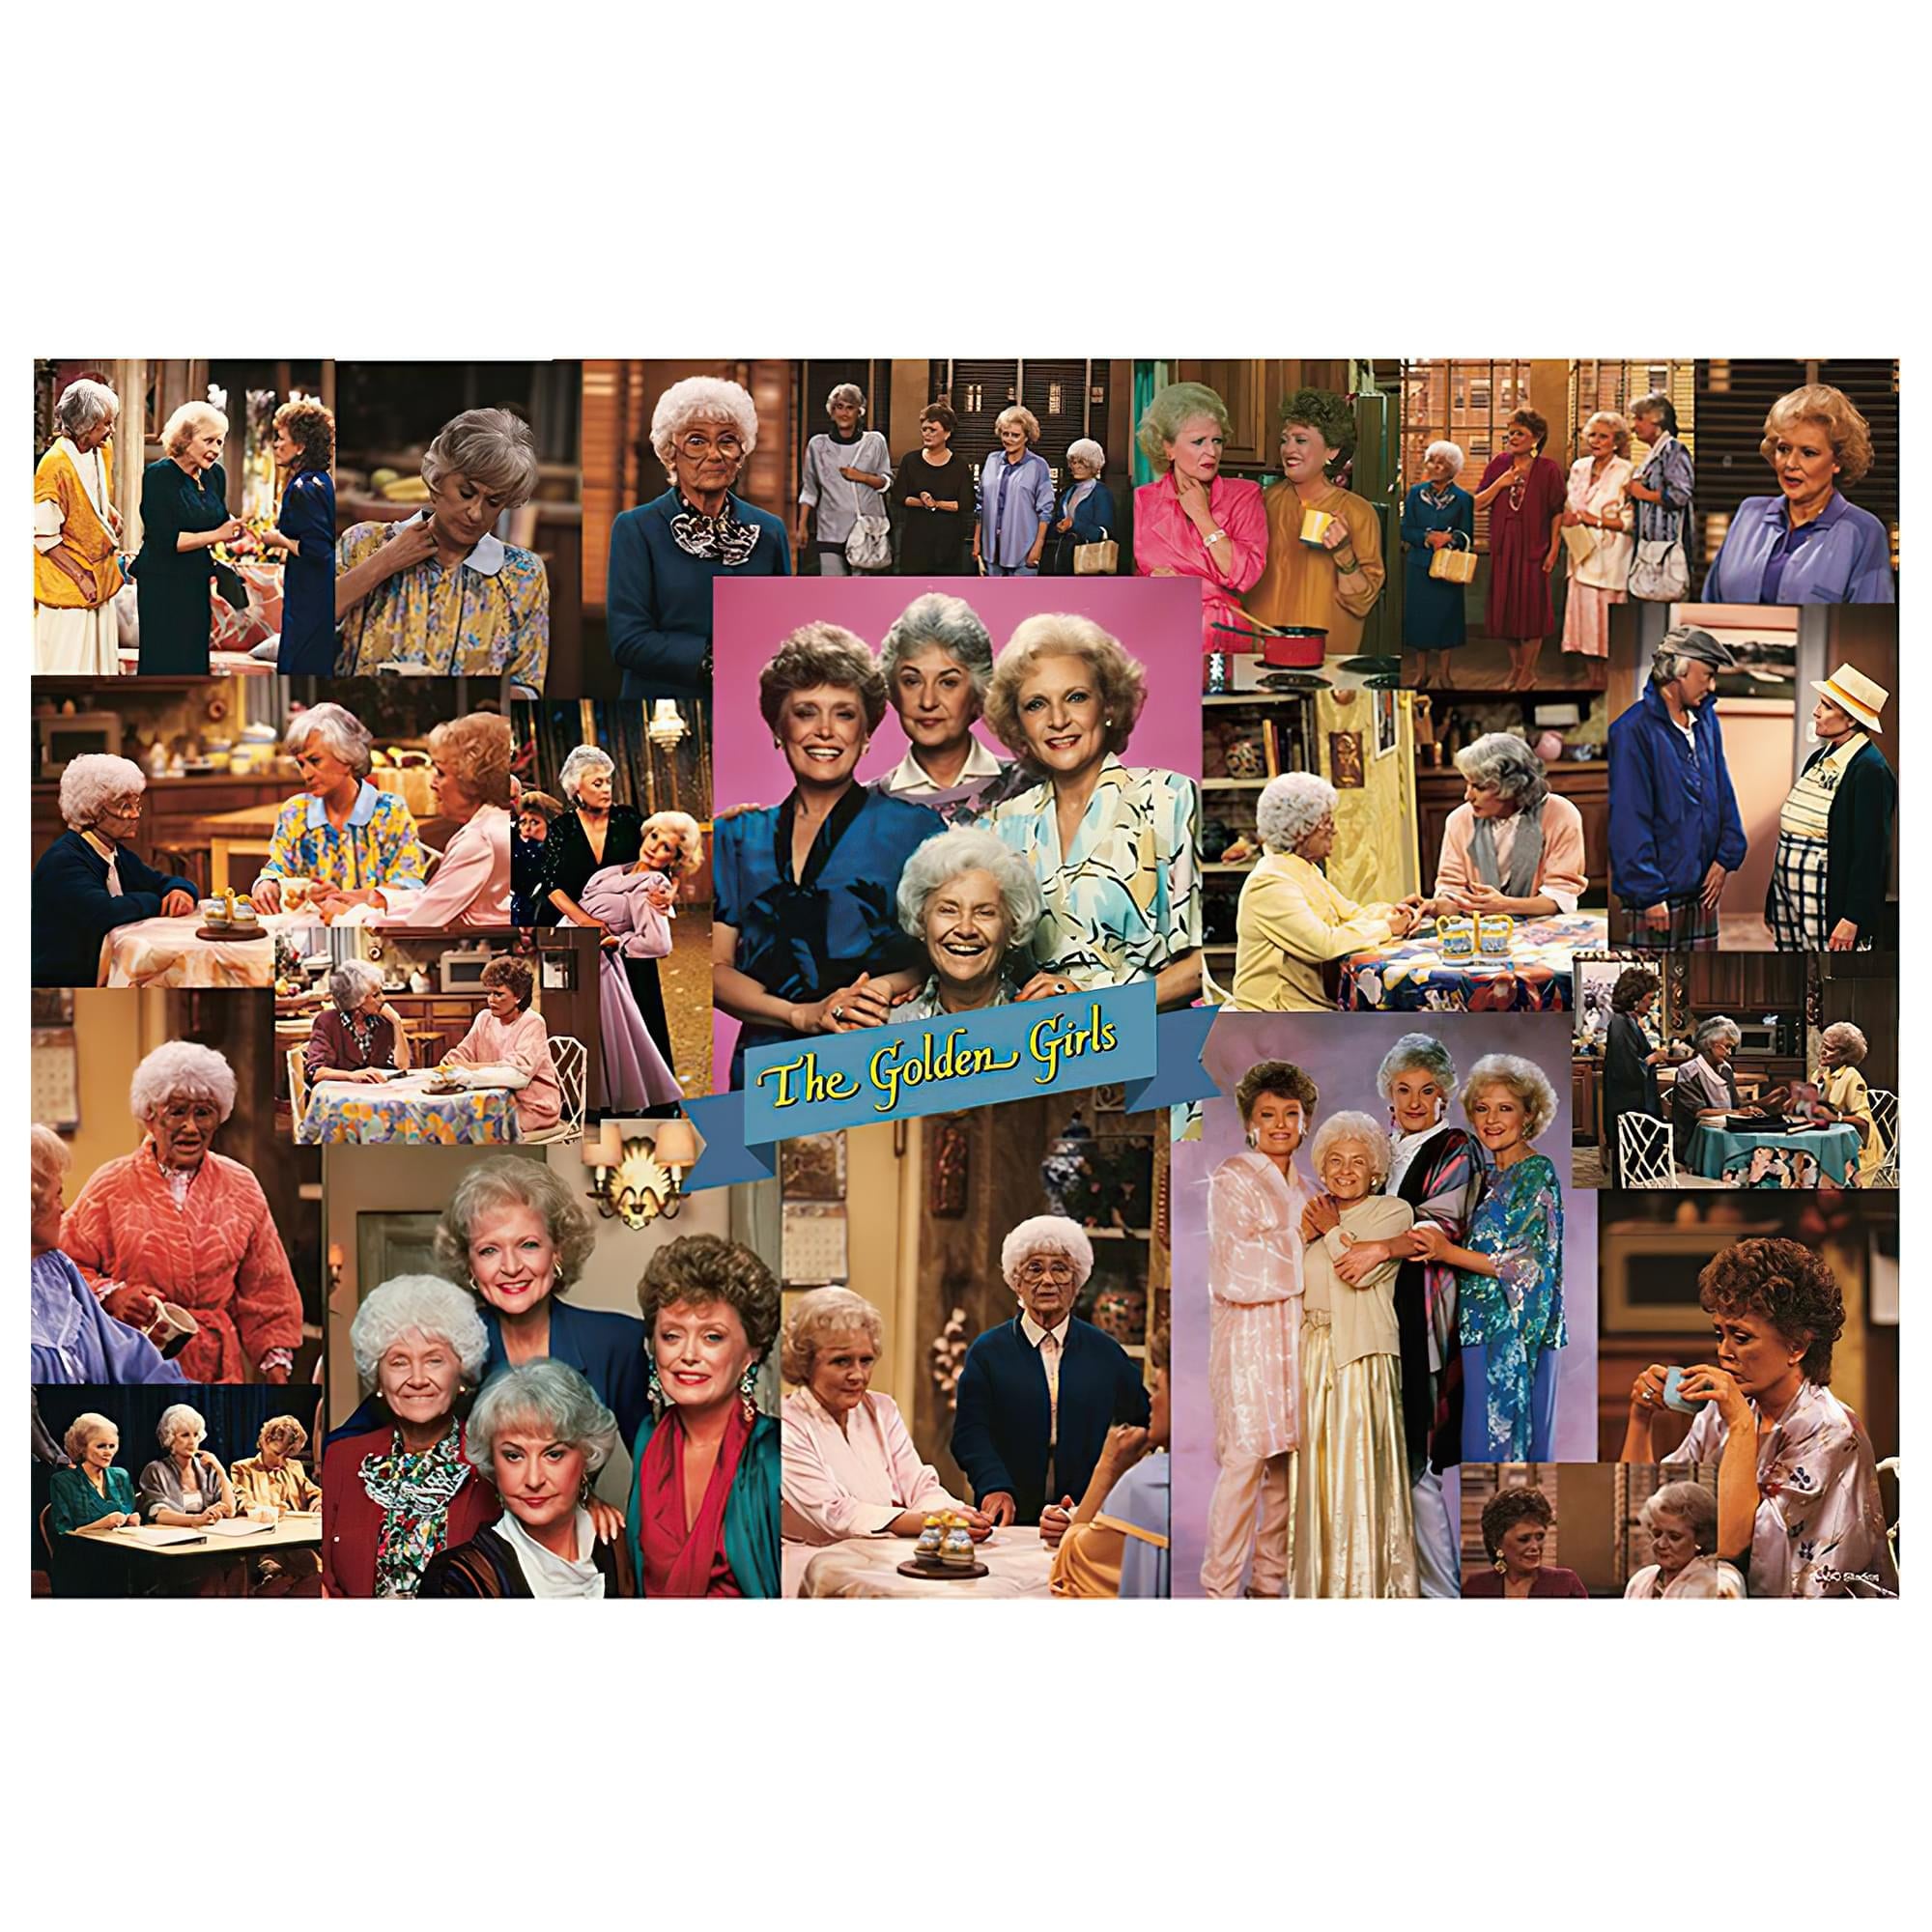 Golden Girls Collage '80s Puzzle For Adults And Kids , 1000 Piece Jigsaw Puzzle